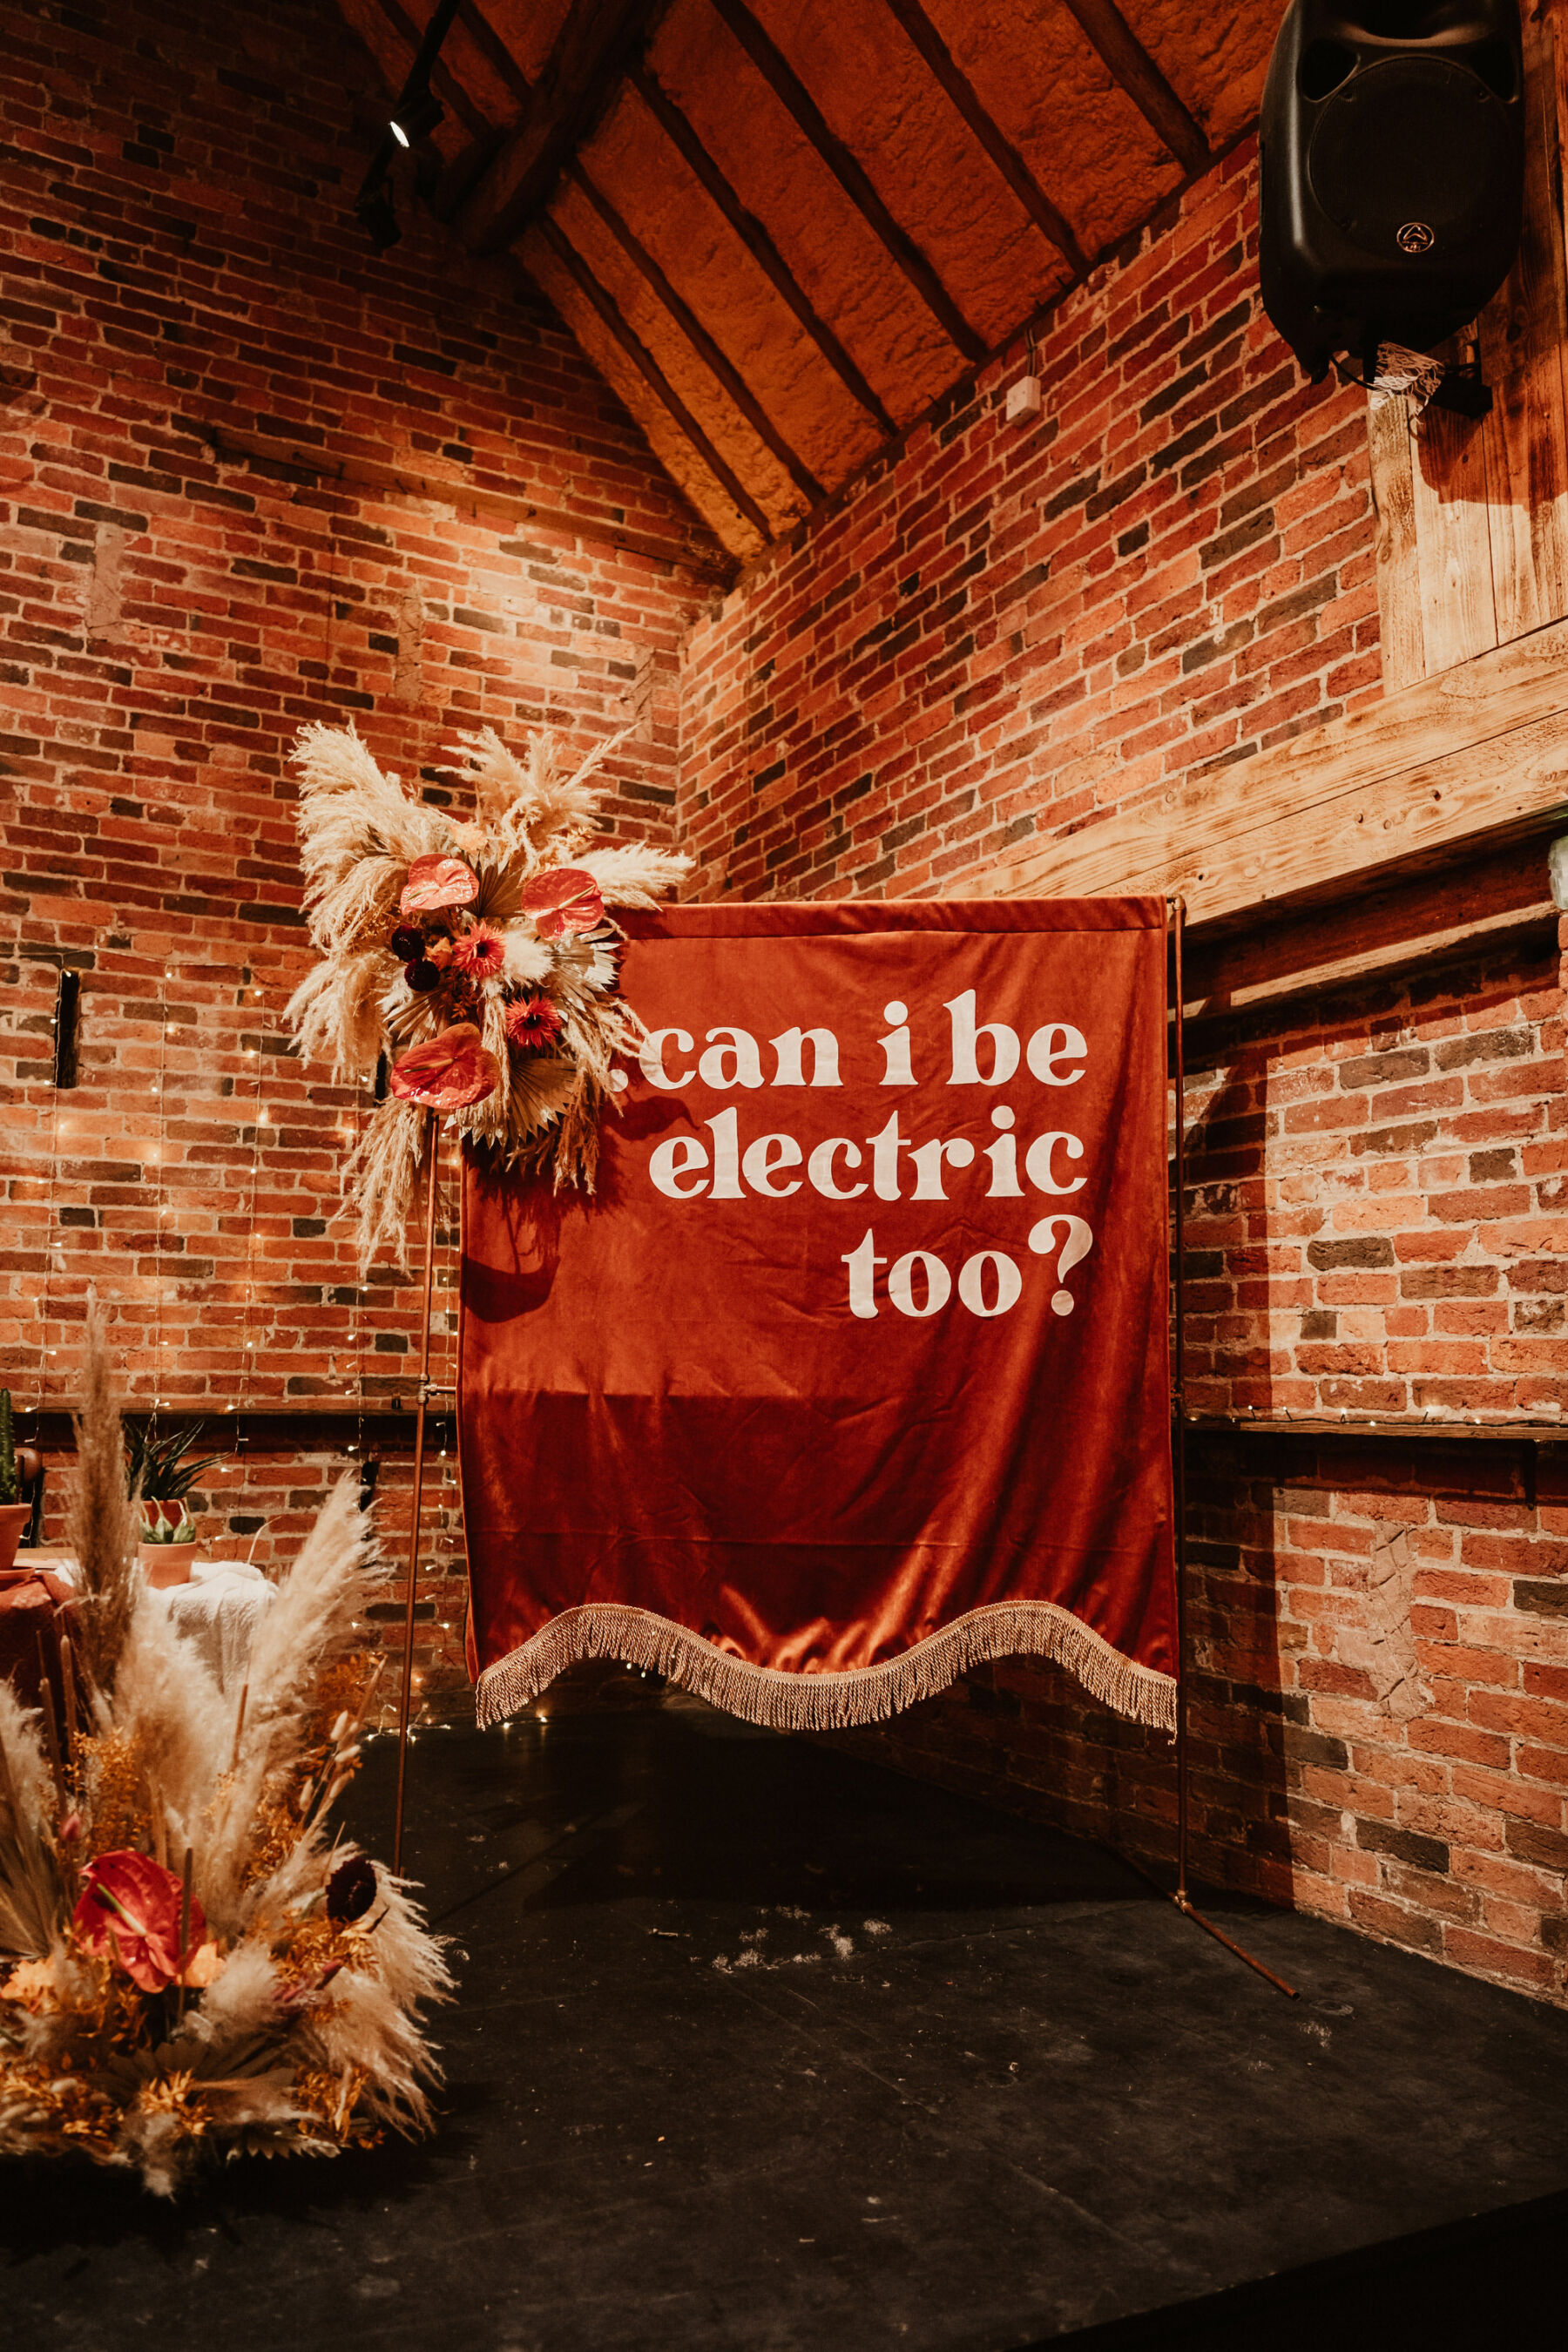 If she is electric, can I be electric too - wedding banner with tassels. Bohemian wedding ceremony backdrop. 